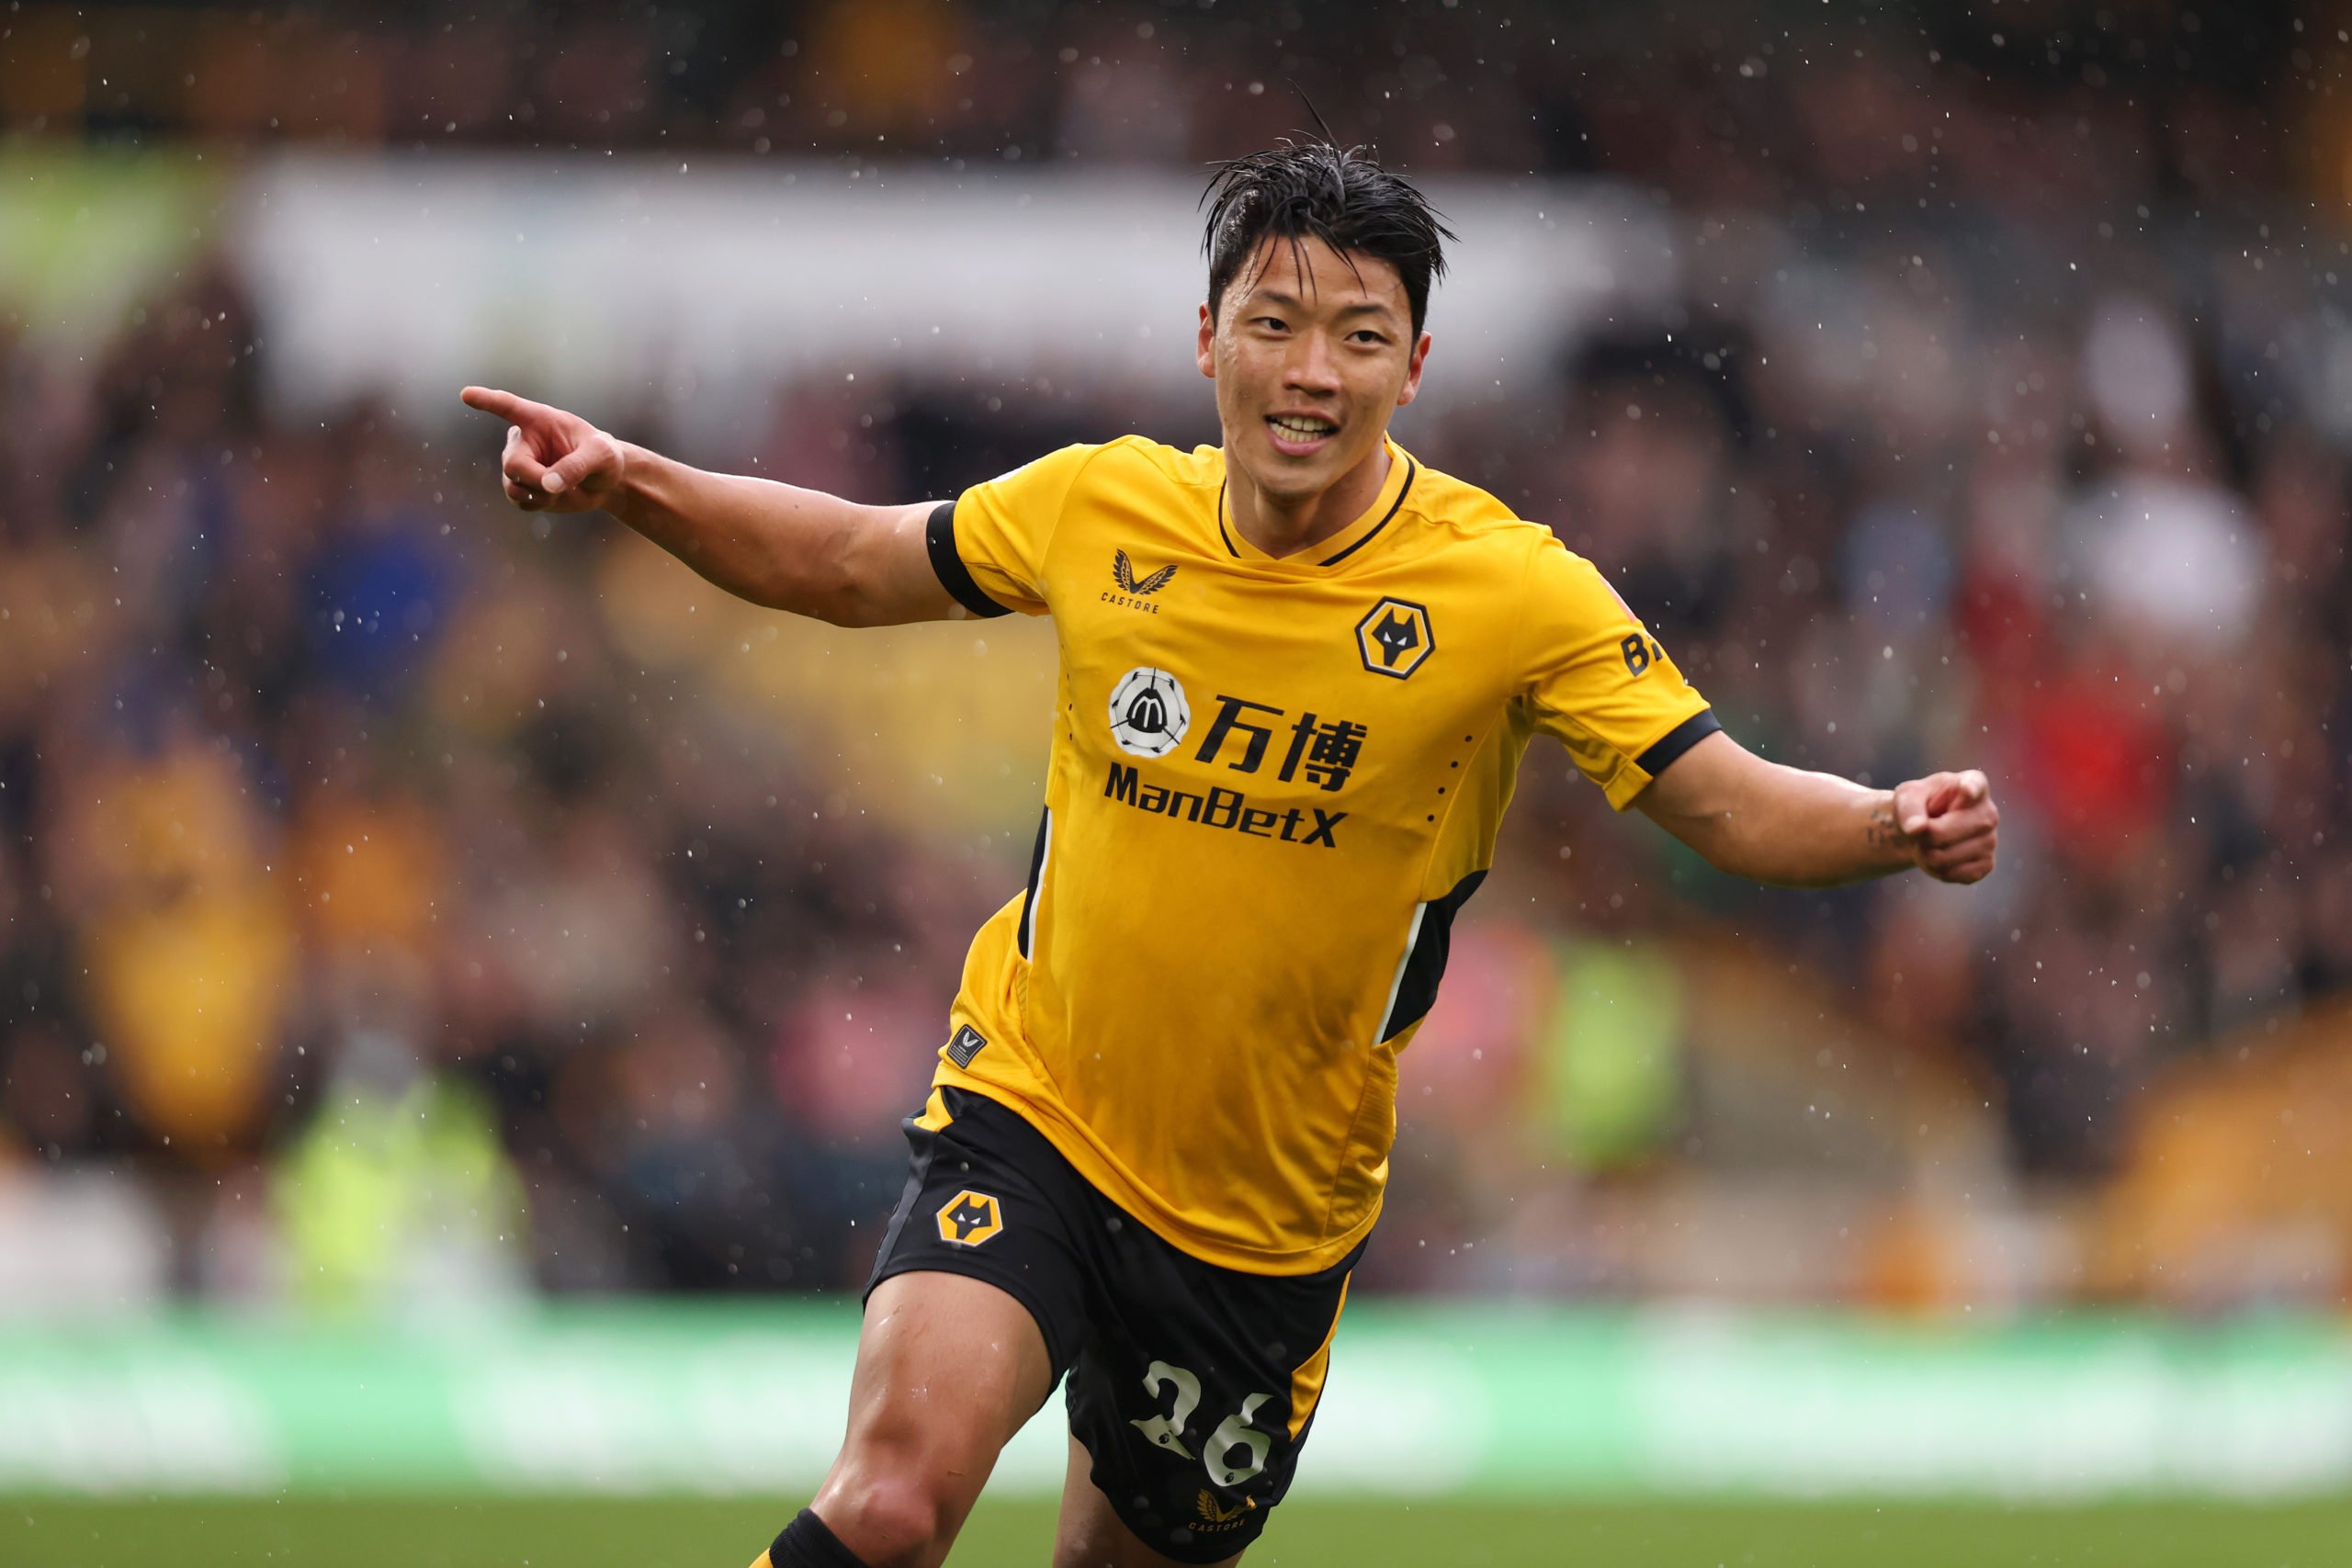 WOLVERHAMPTON, ENGLAND - OCTOBER 02: Hwang Hee-chan of Wolverhampton Wanderers celebrates after scoring their team's second goal during the Premier League match between Wolverhampton Wanderers and Newcastle United at Molineux on October 02, 2021 in Wolverhampton, England. (Photo by Naomi Baker/Getty Images)The 4th Official uses images provided by the following image agency: Getty Images (https://www.gettyimages.de/) and Imago Images (https://www.imago-images.de/)